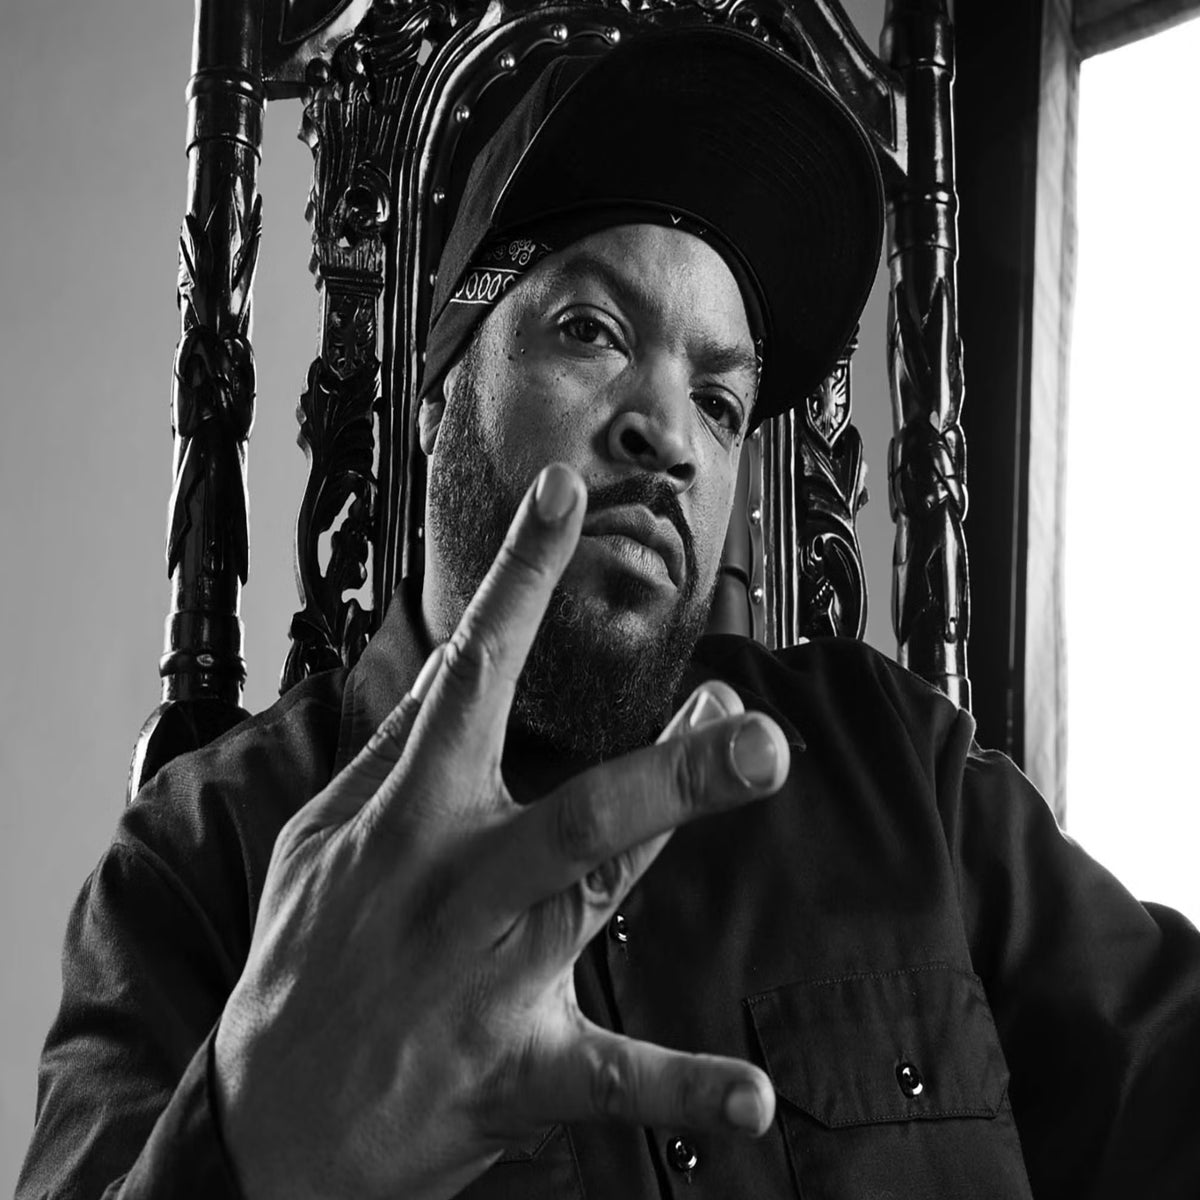 https://static.independent.co.uk/2023/08/04/11/ice-cube.jpg?width=1200&height=1200&fit=crop